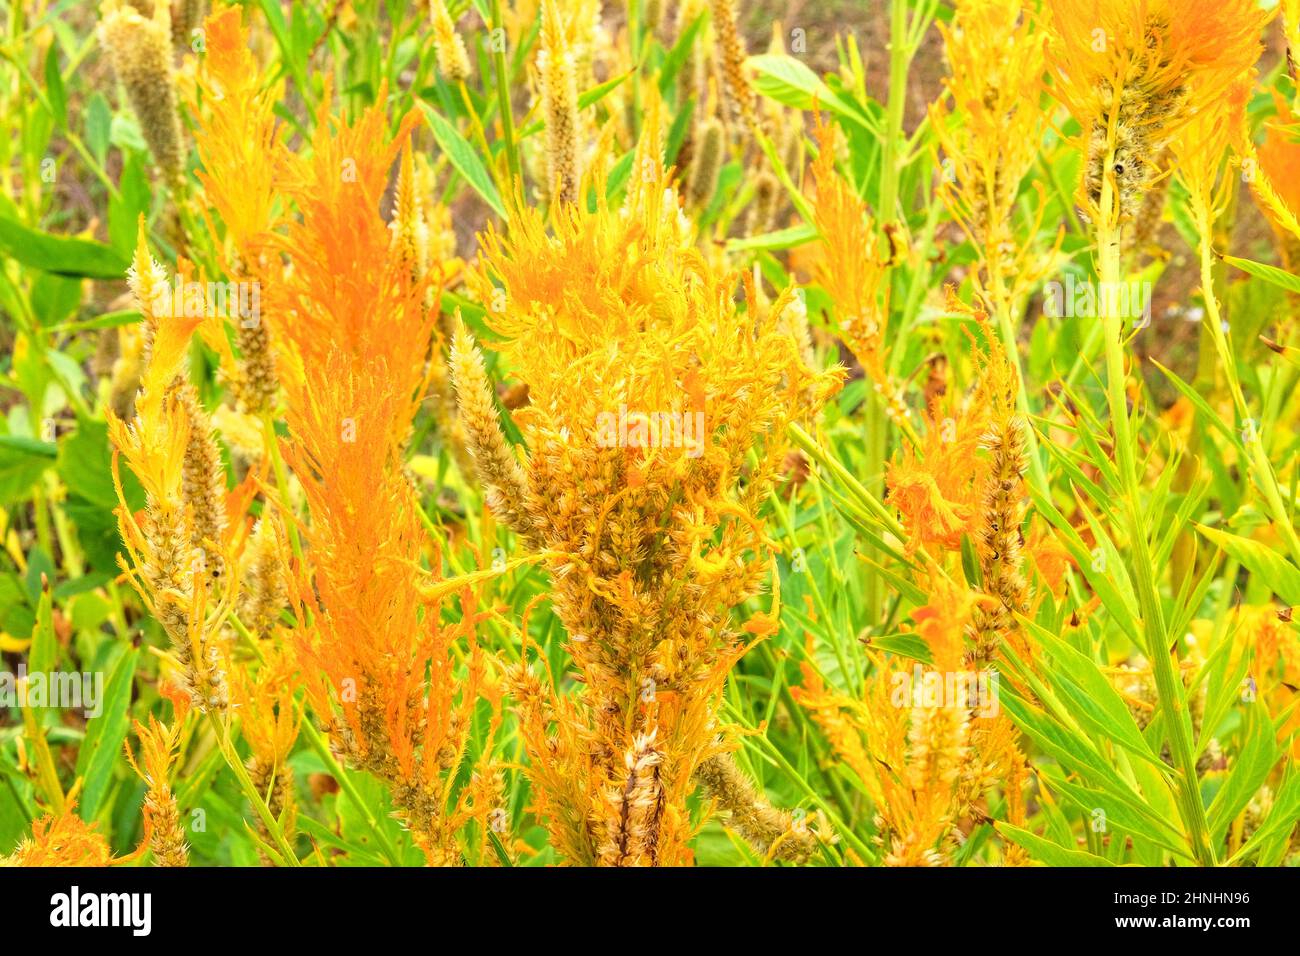 Organic yellow Amaranth in farming and harvesting. Amaranth is growing in rustic garden. Growing vegetables at home. Closeup. Stock Photo